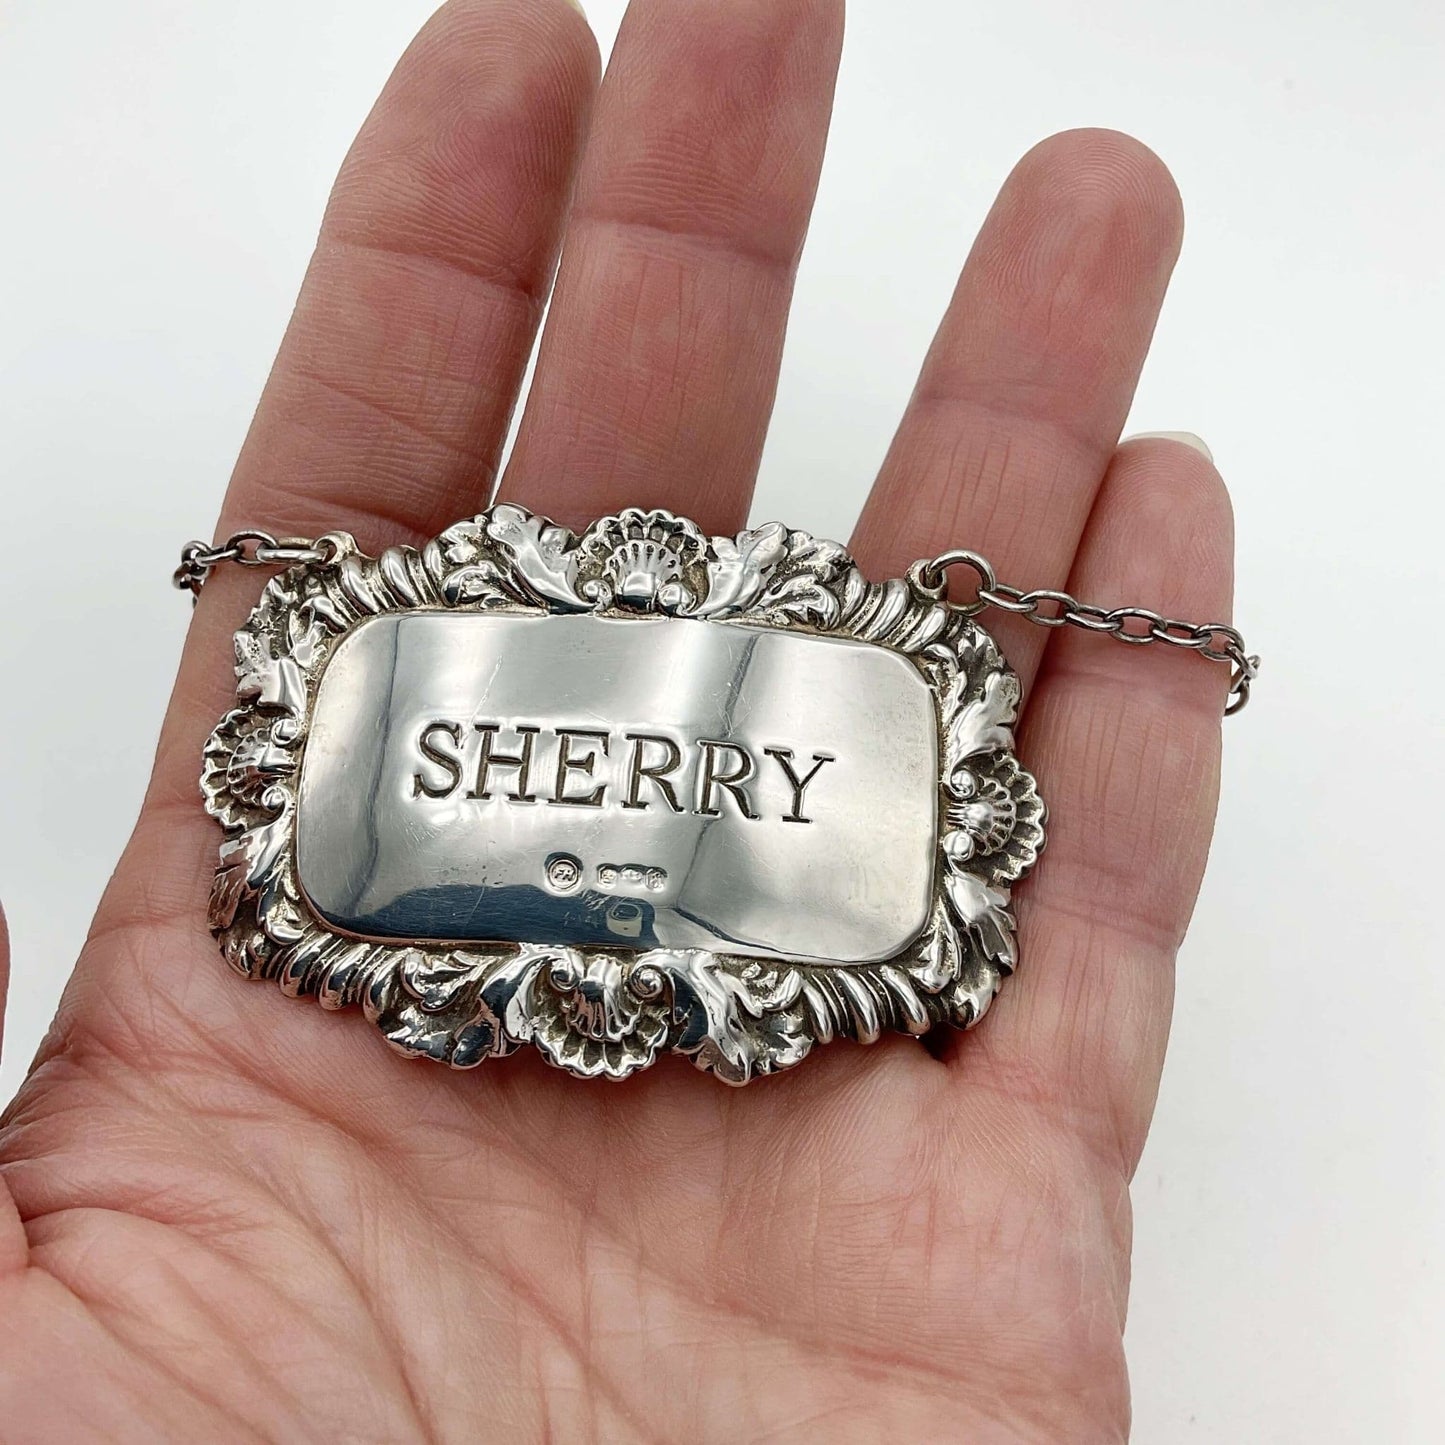 1972 Sterling Silver Sherry Decanter Label